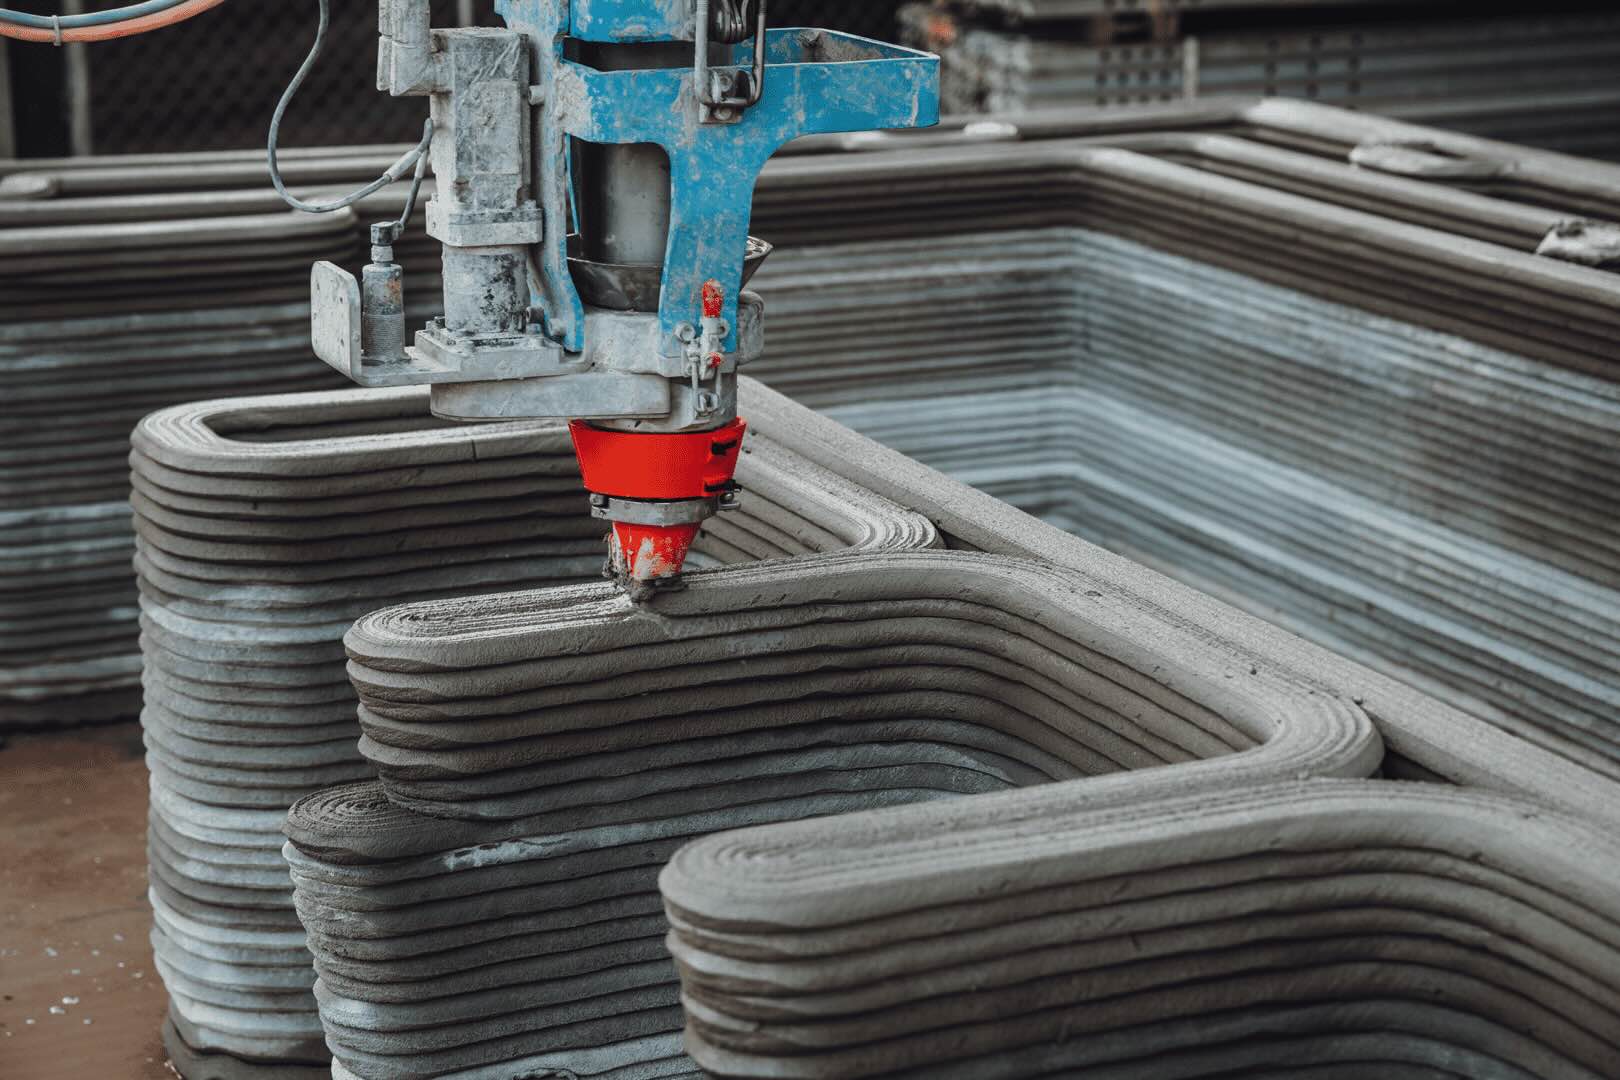 How Does 3D Printing Help In A Construction Project